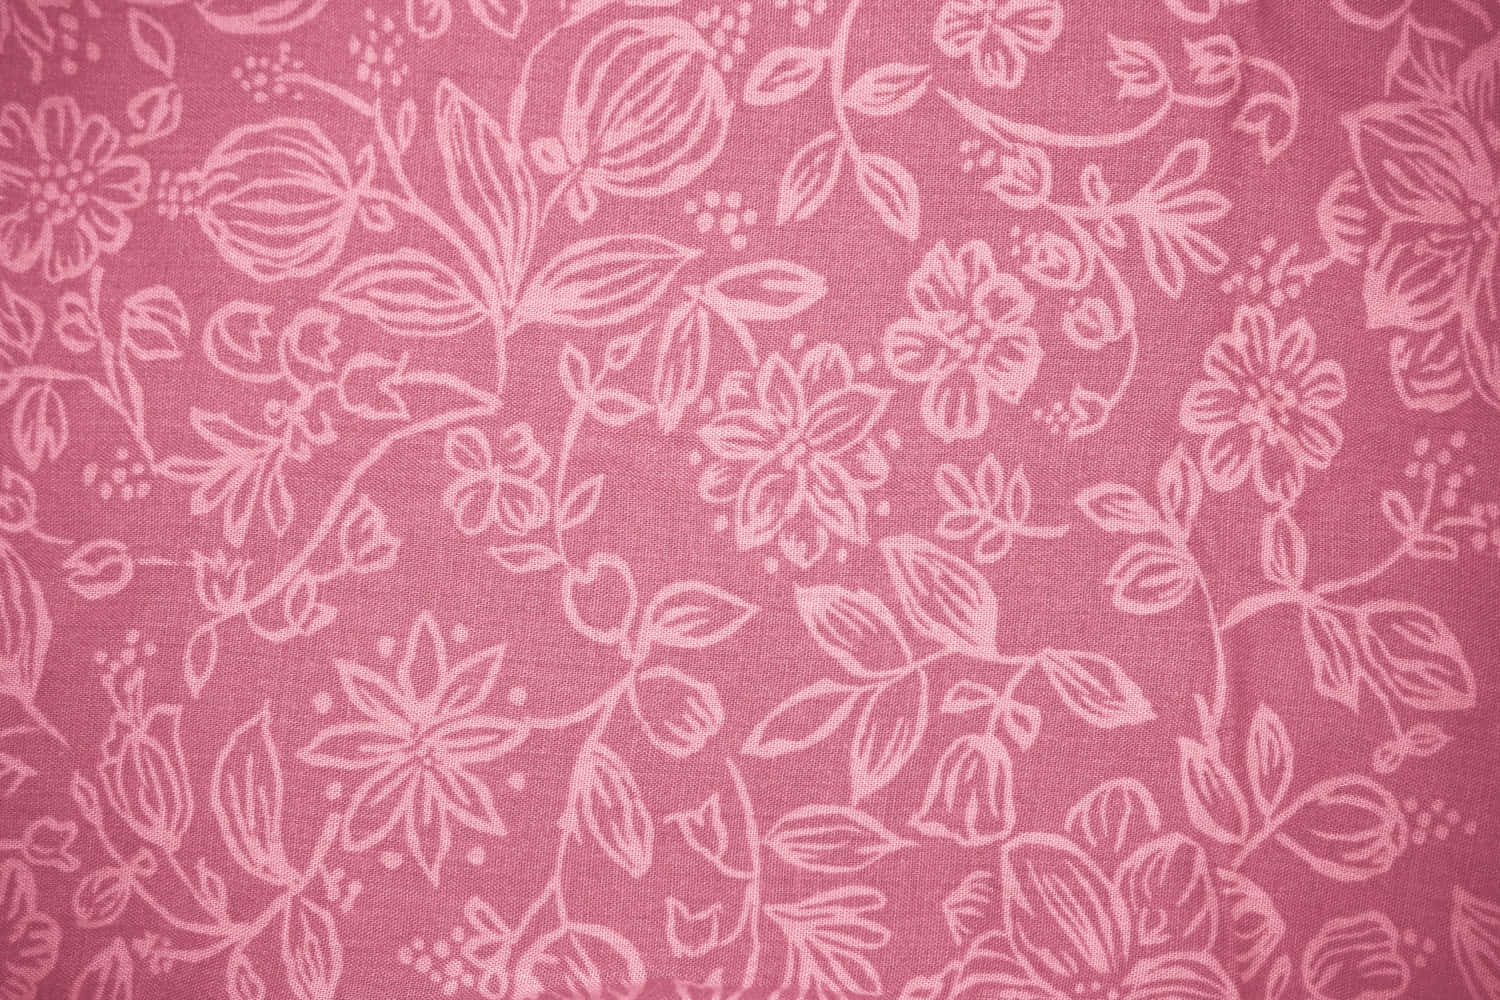 Fabric Texture Picture Pink Linen Floral